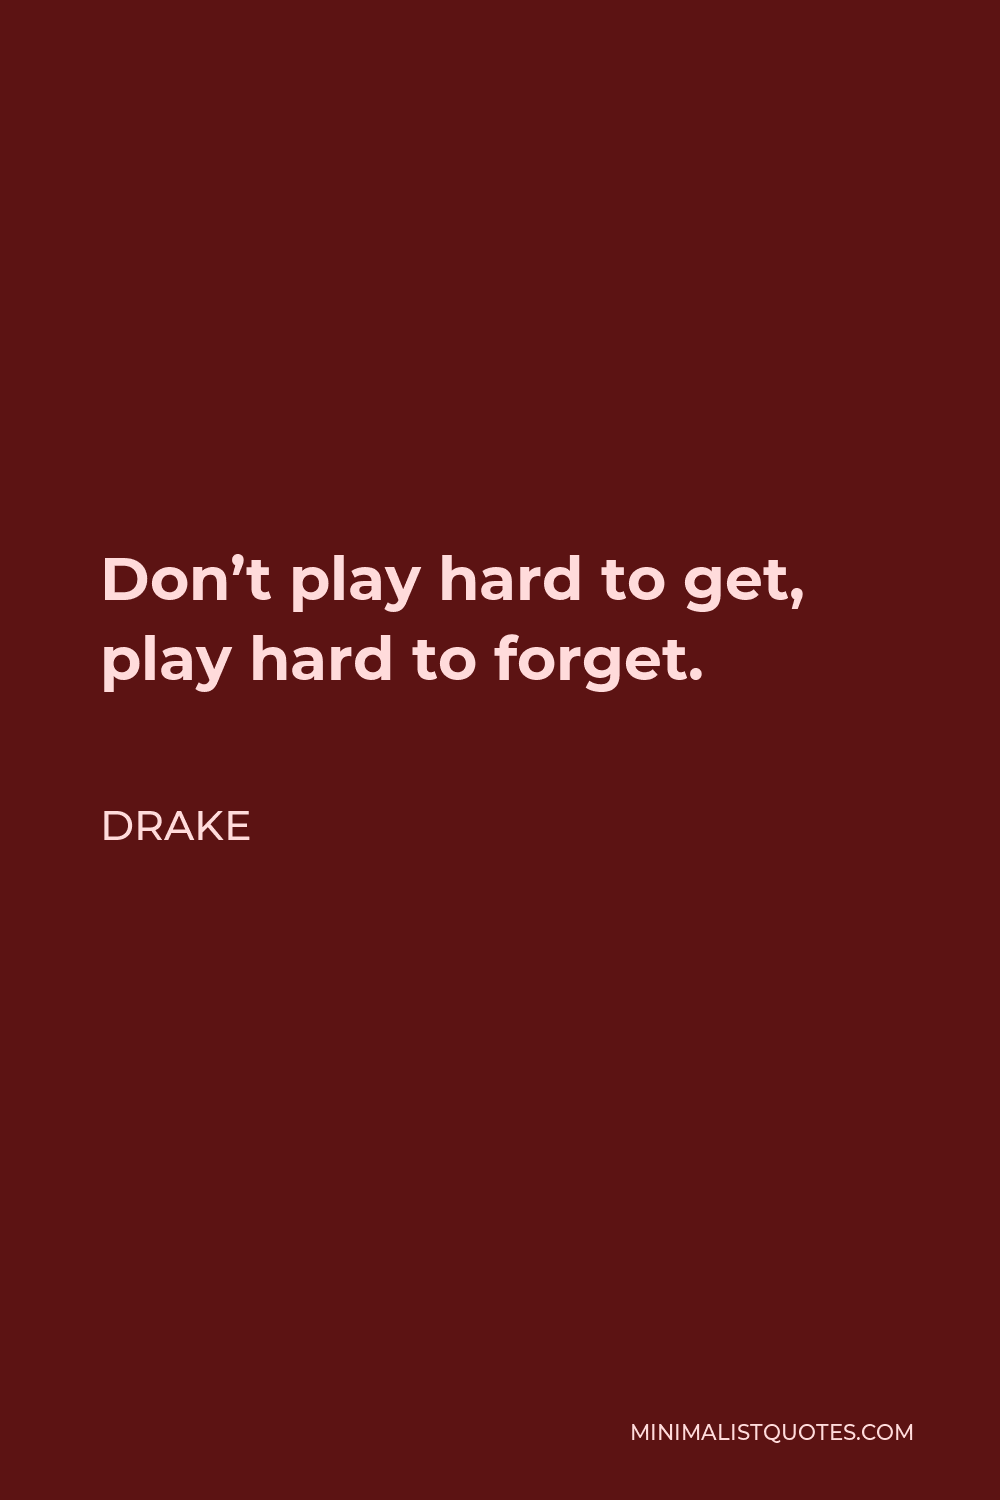 Drake Quote - Don’t play hard to get, play hard to forget.